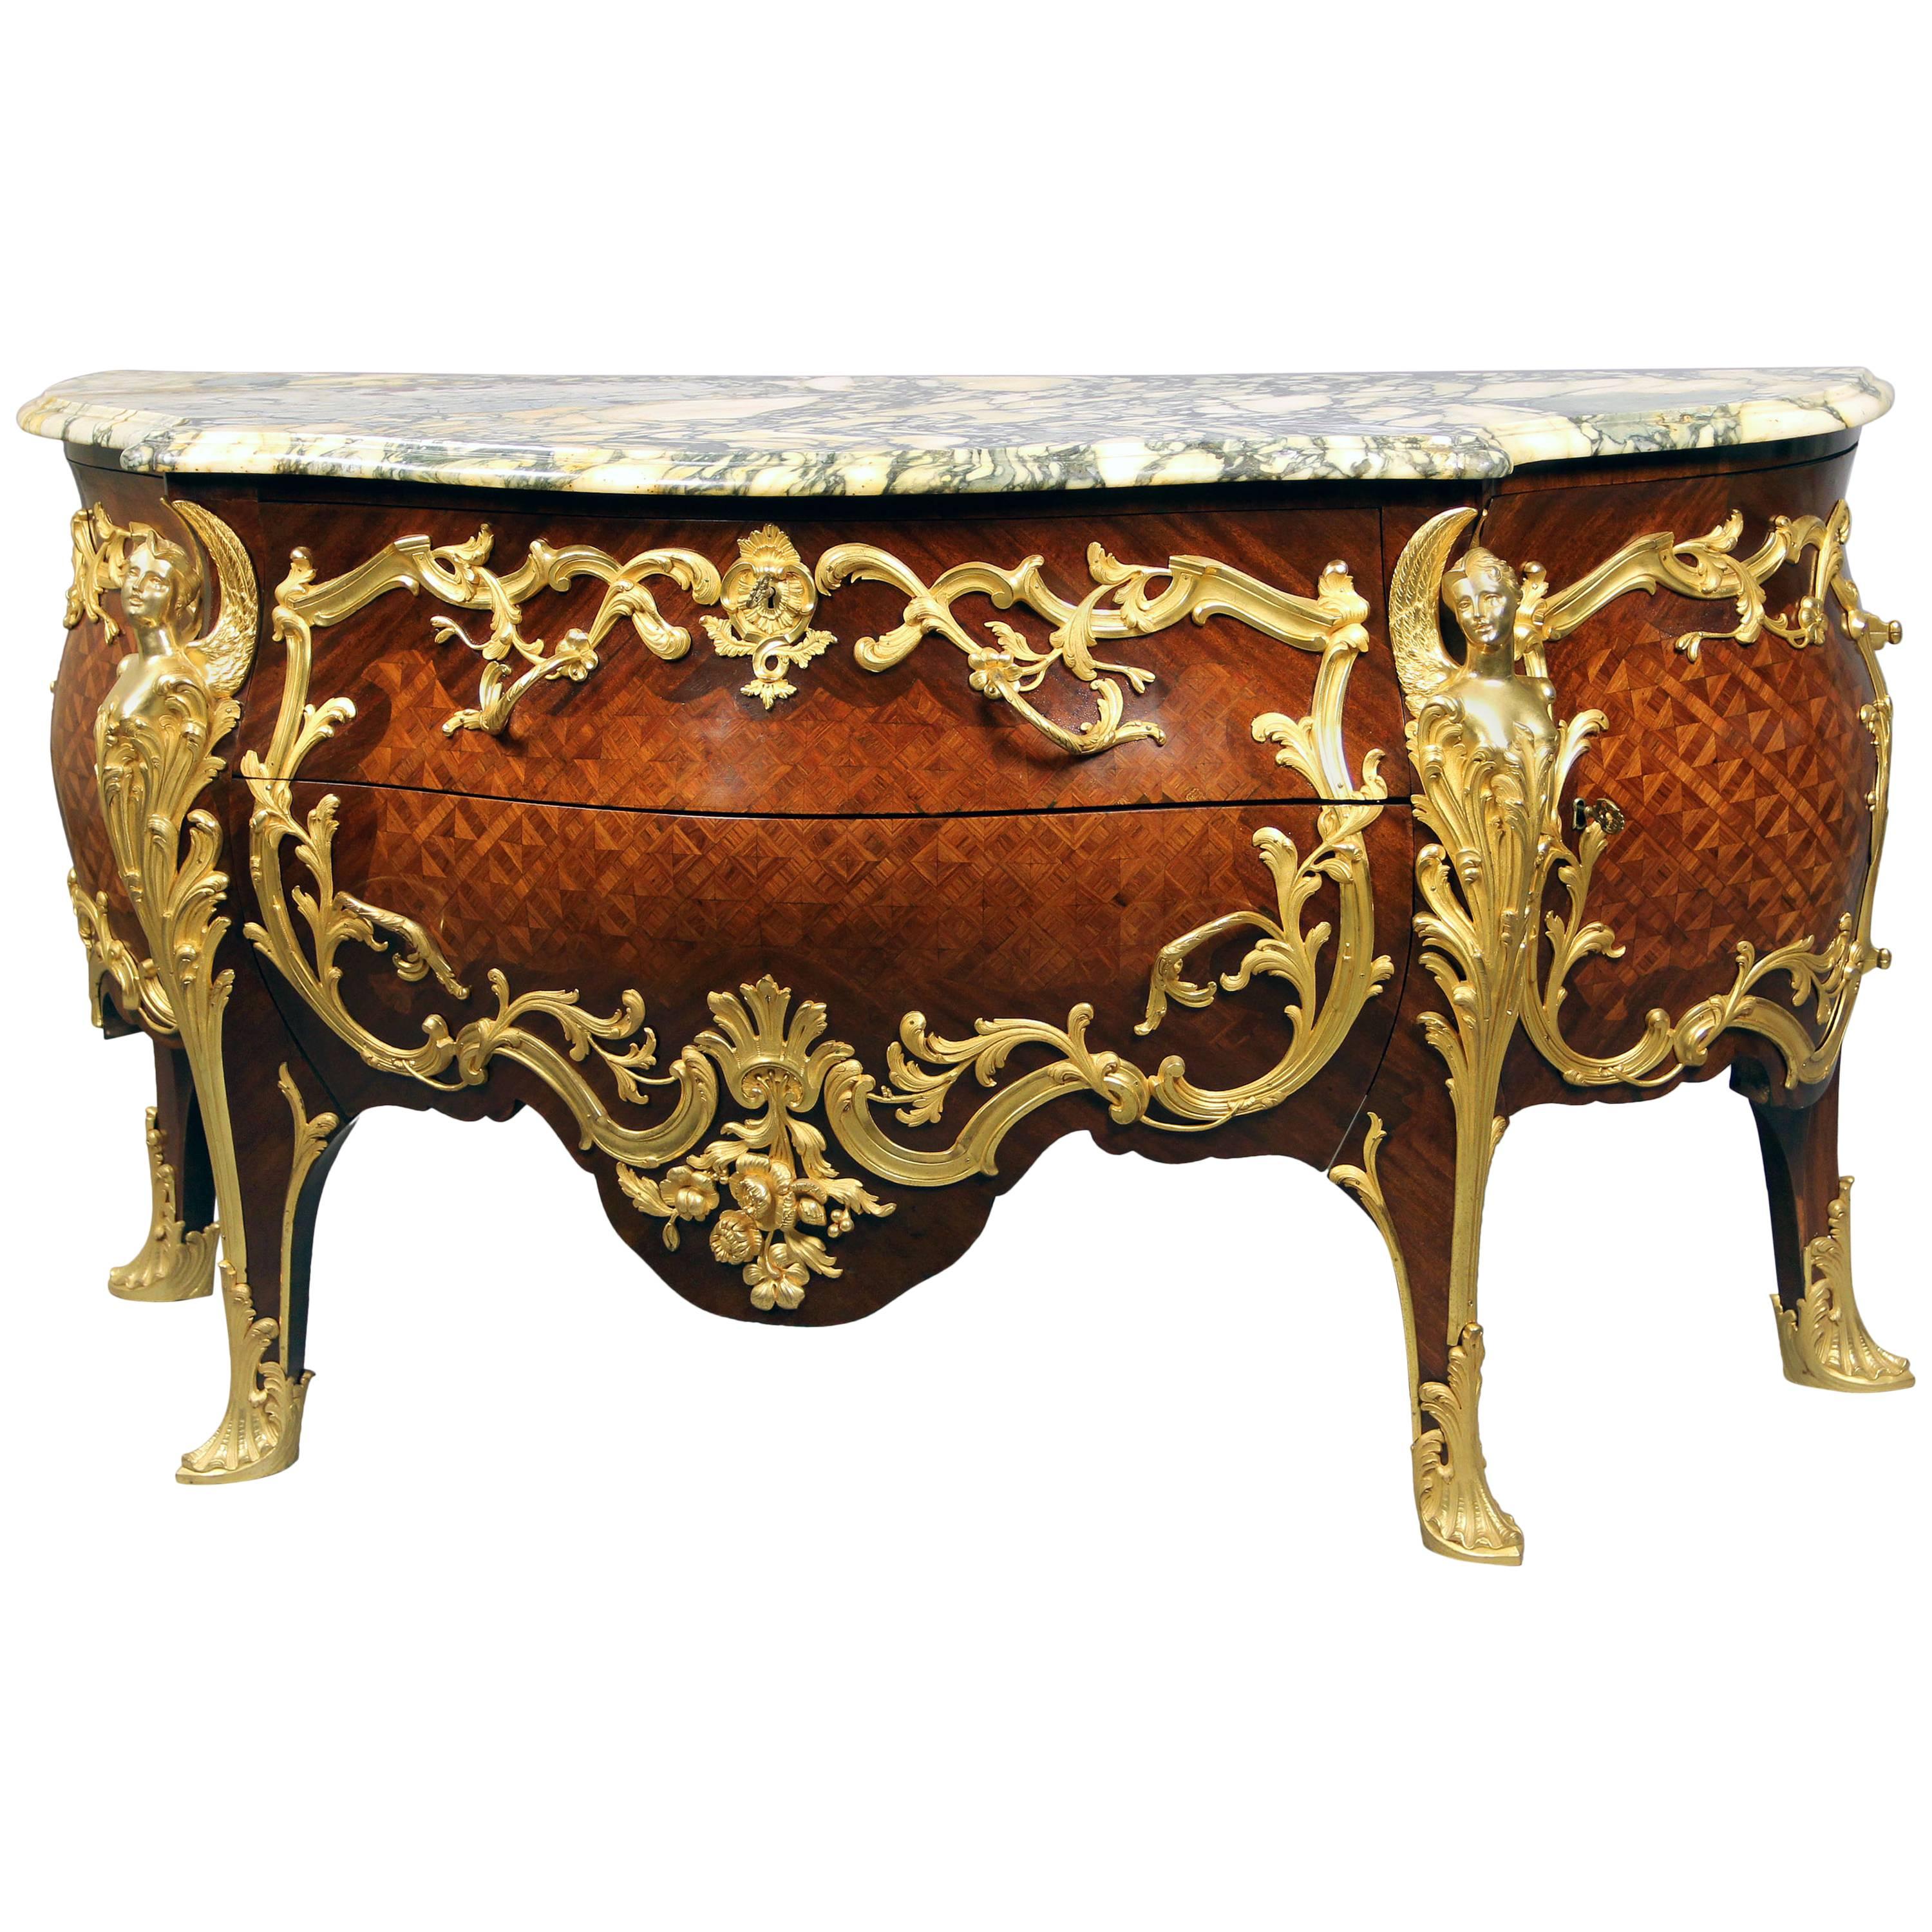 Lovely Late 19th Century Gilt Bronze-Mounted and Parquetry Inlaid Commode